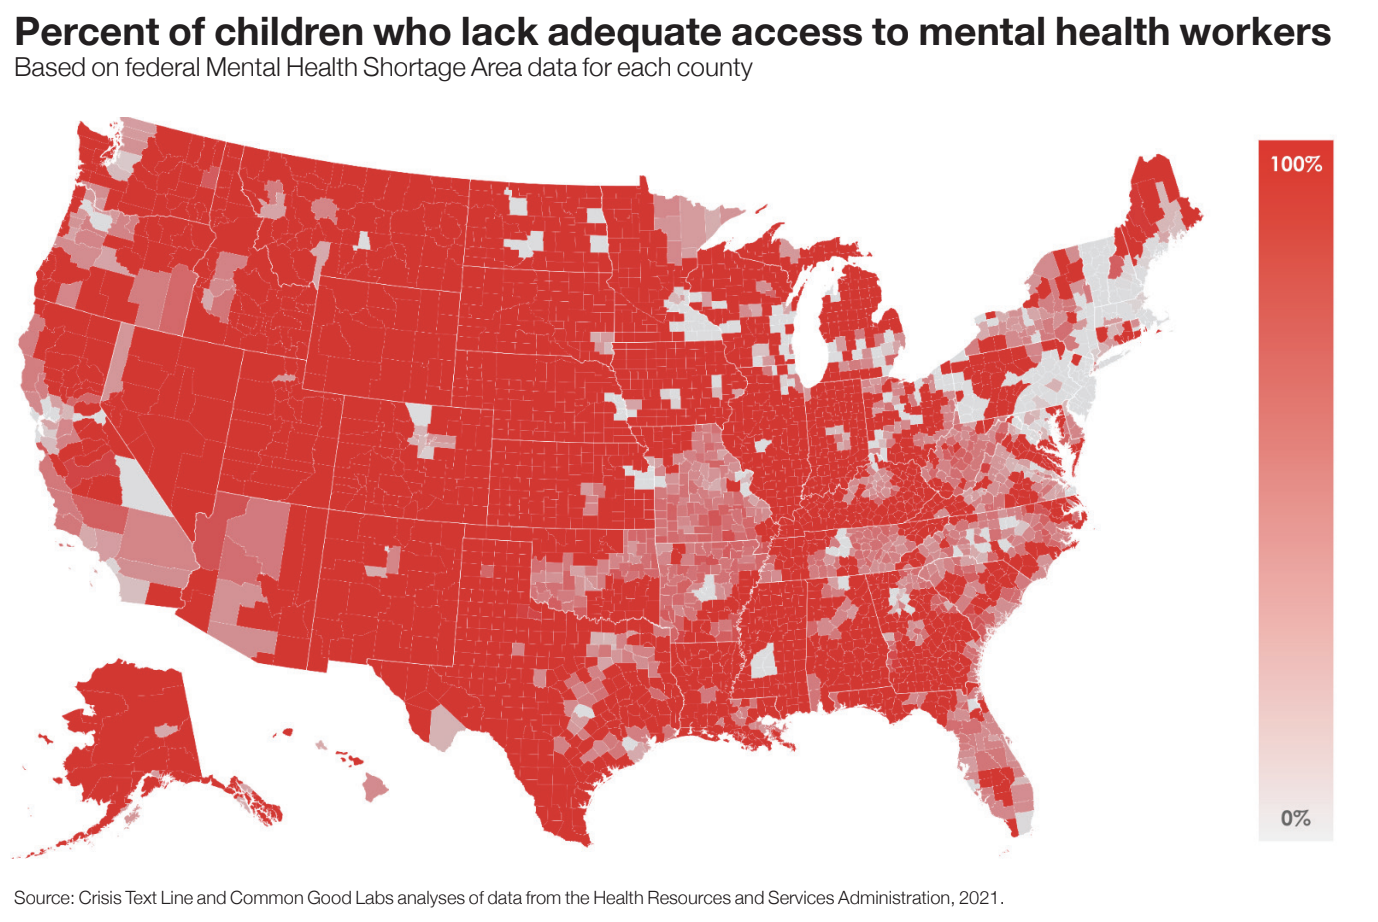 A map of mental health shortage areas in the U.S.